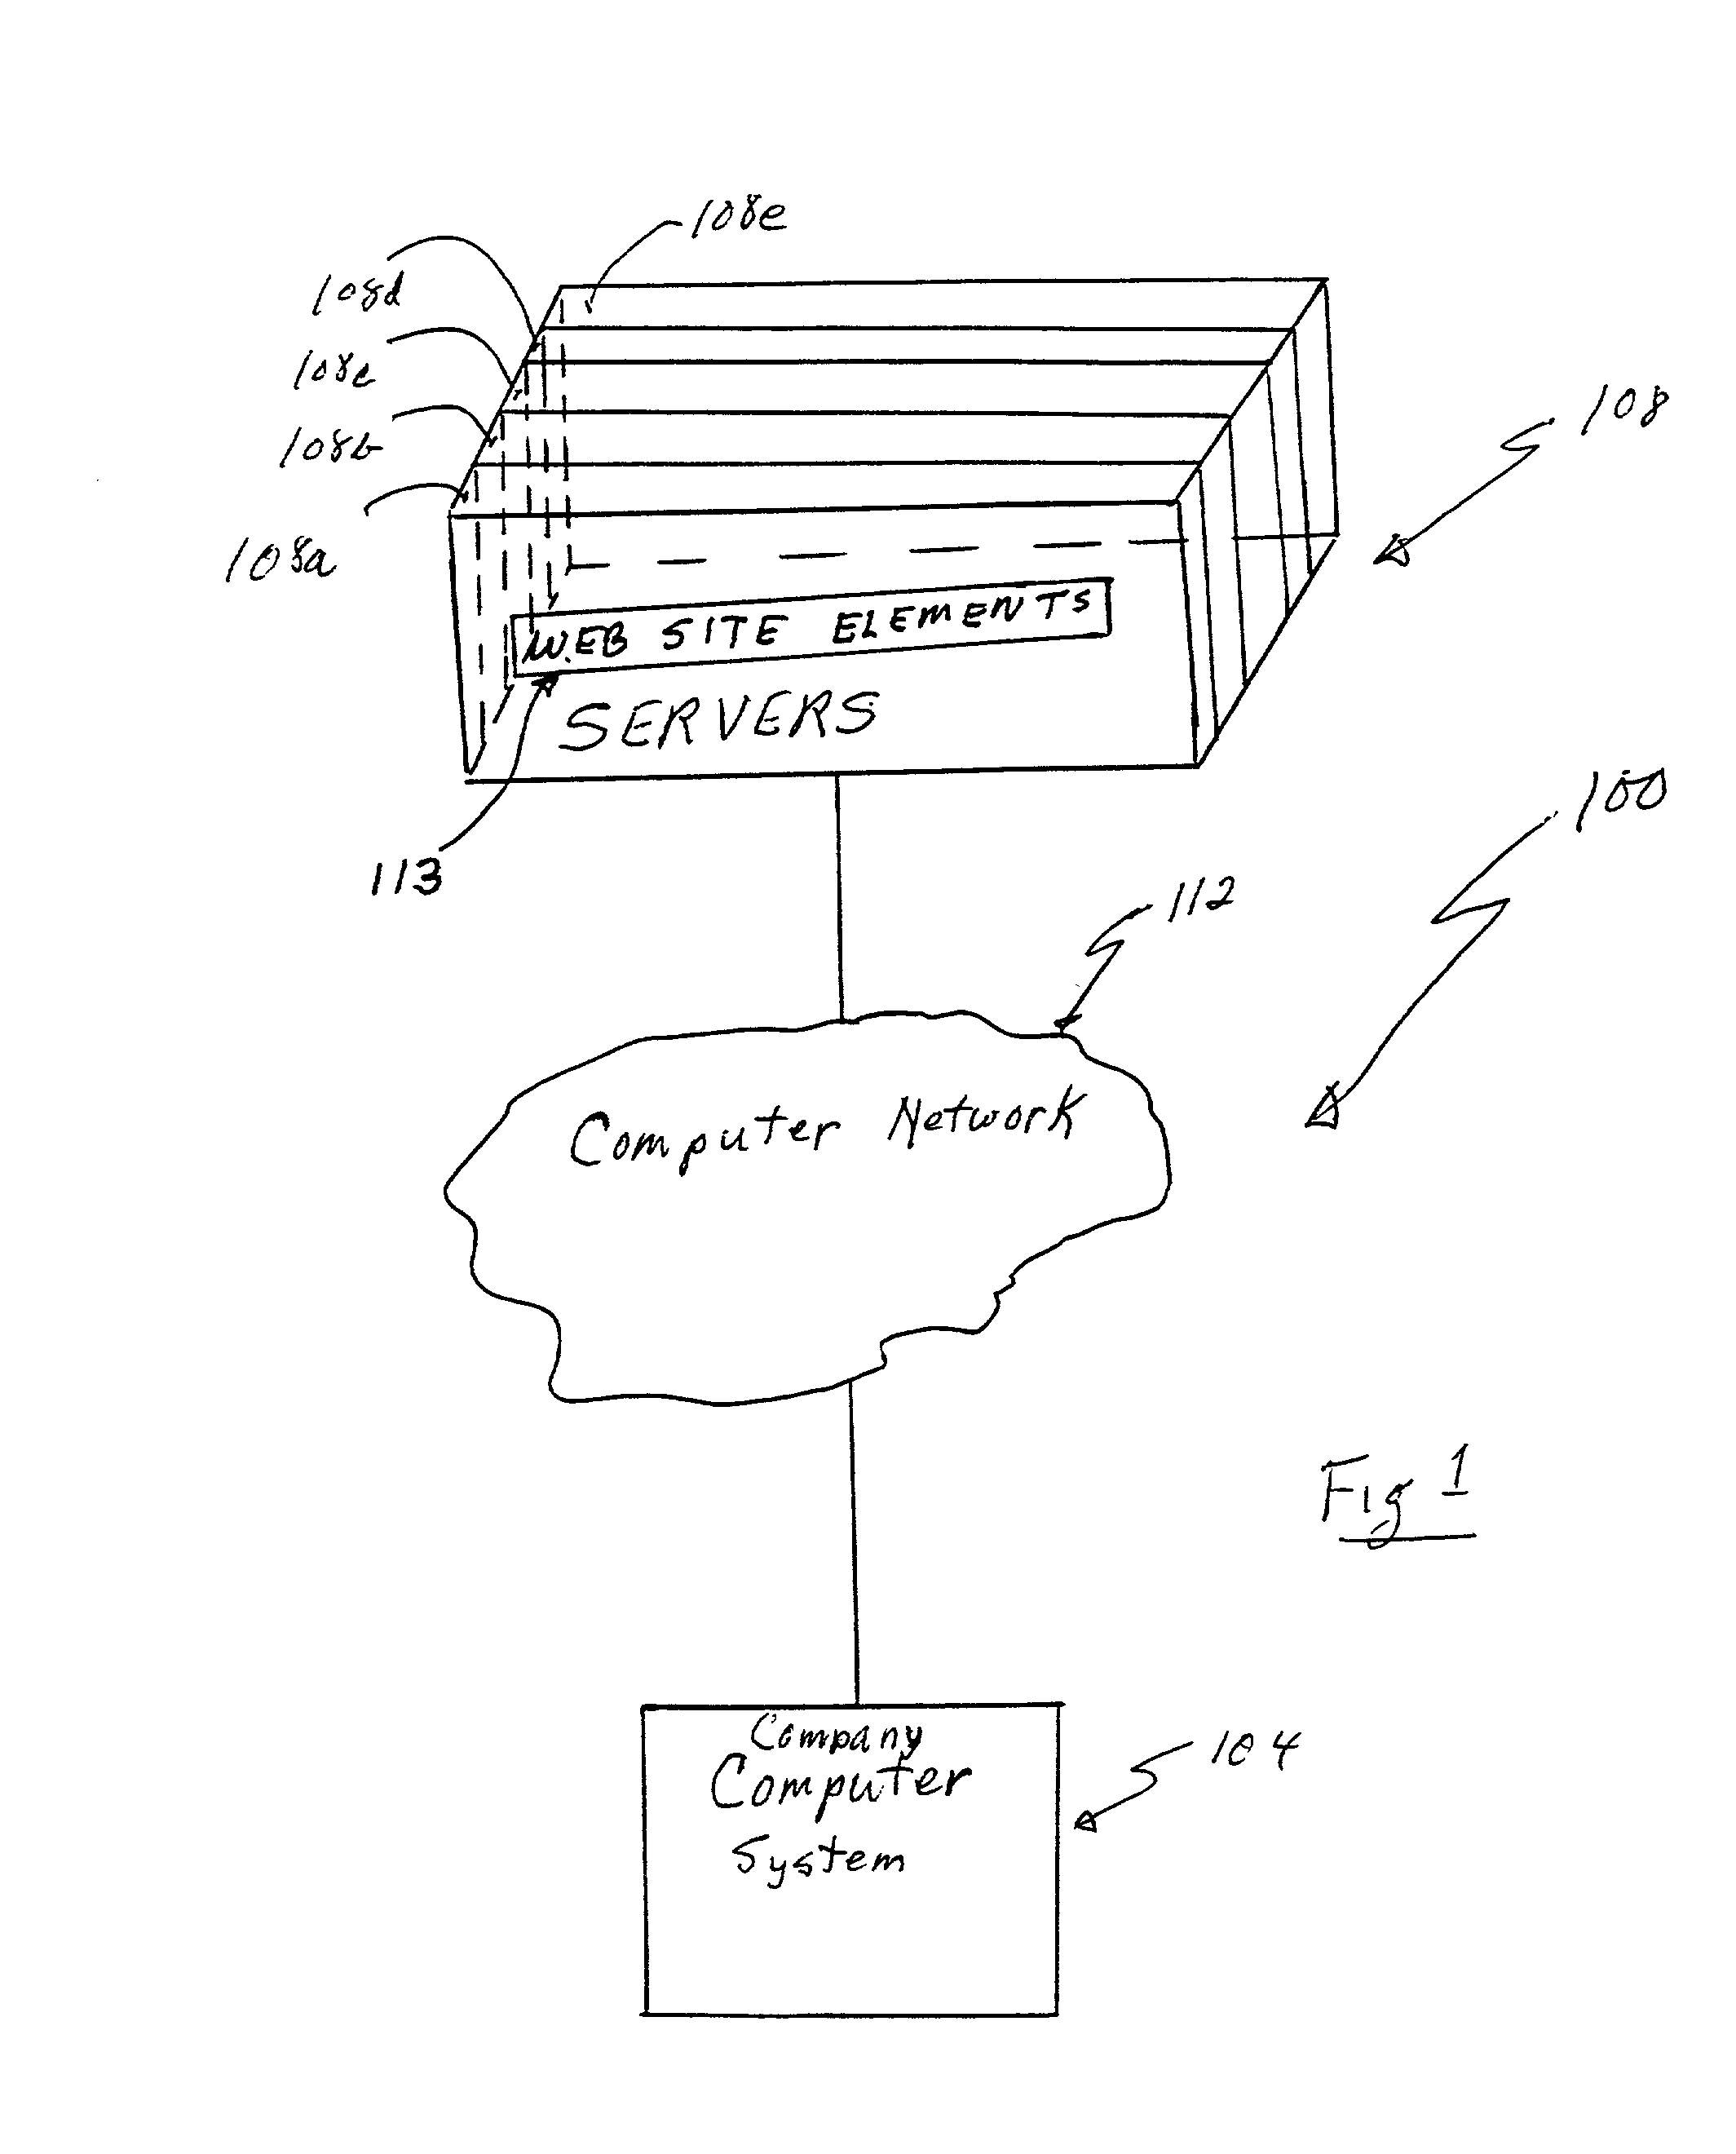 System and method for compiling images from a database and comparing the compiled images with known images